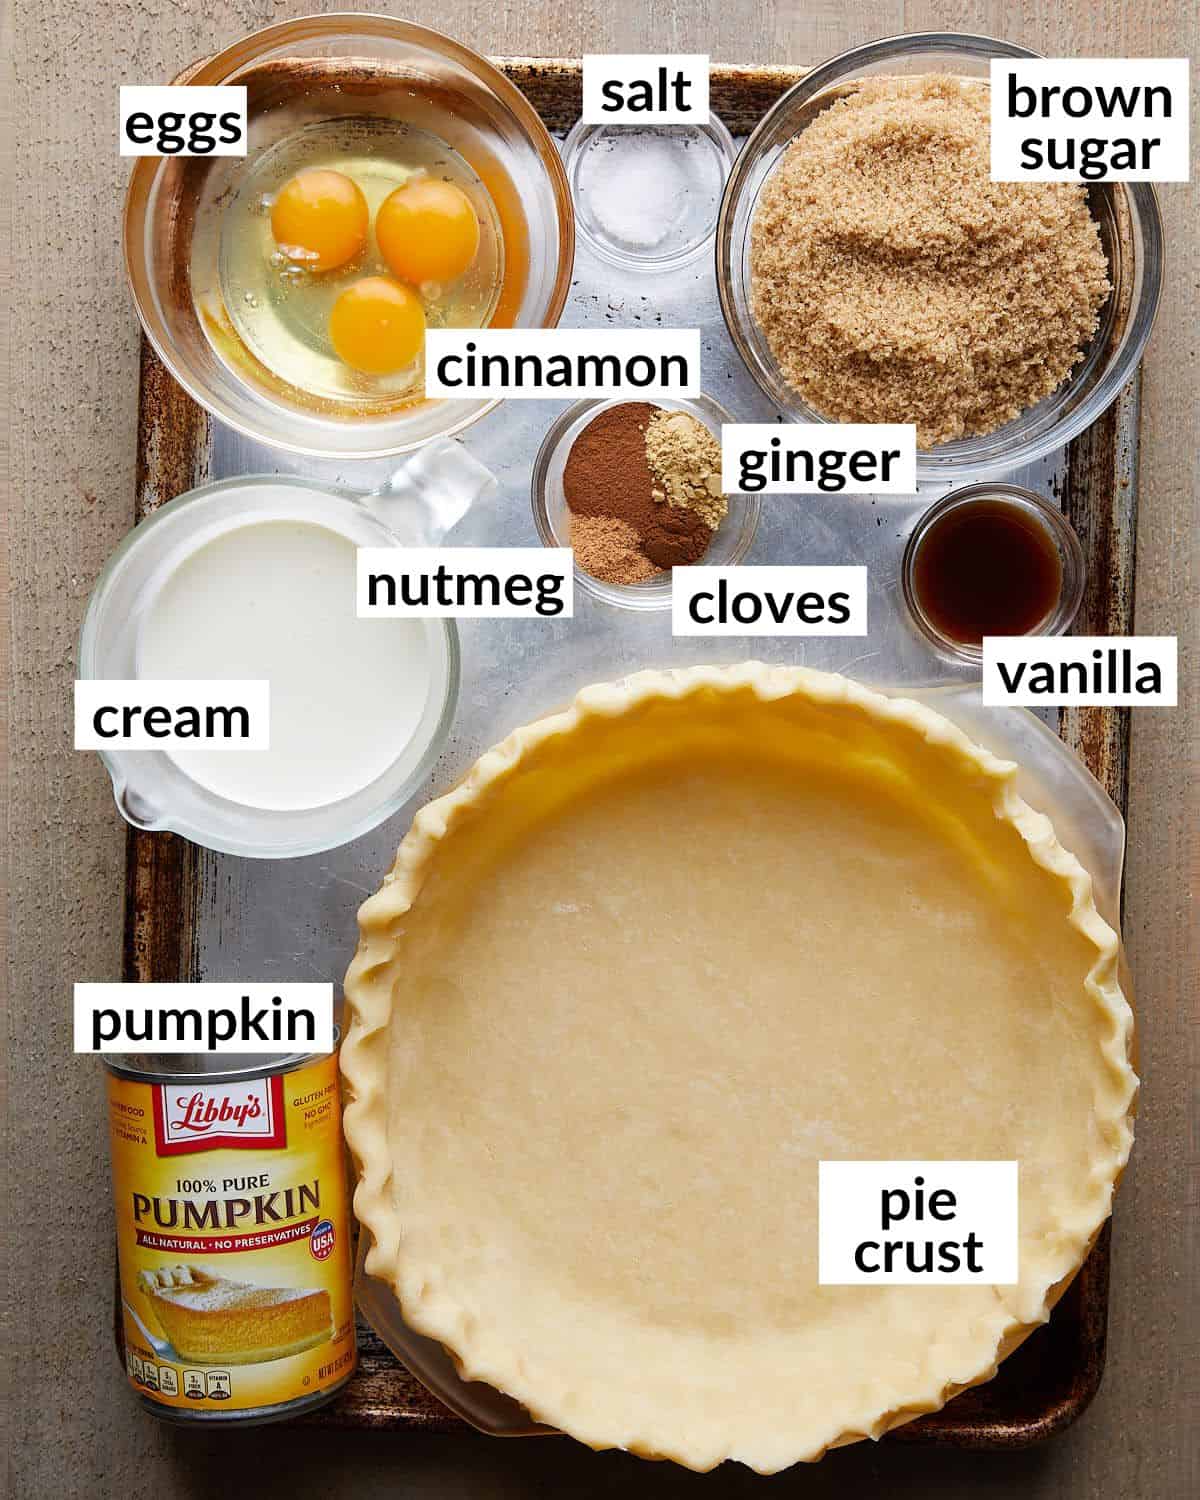 Overhead image of ingredients needed to make pumpkin pie without evaporated milk.